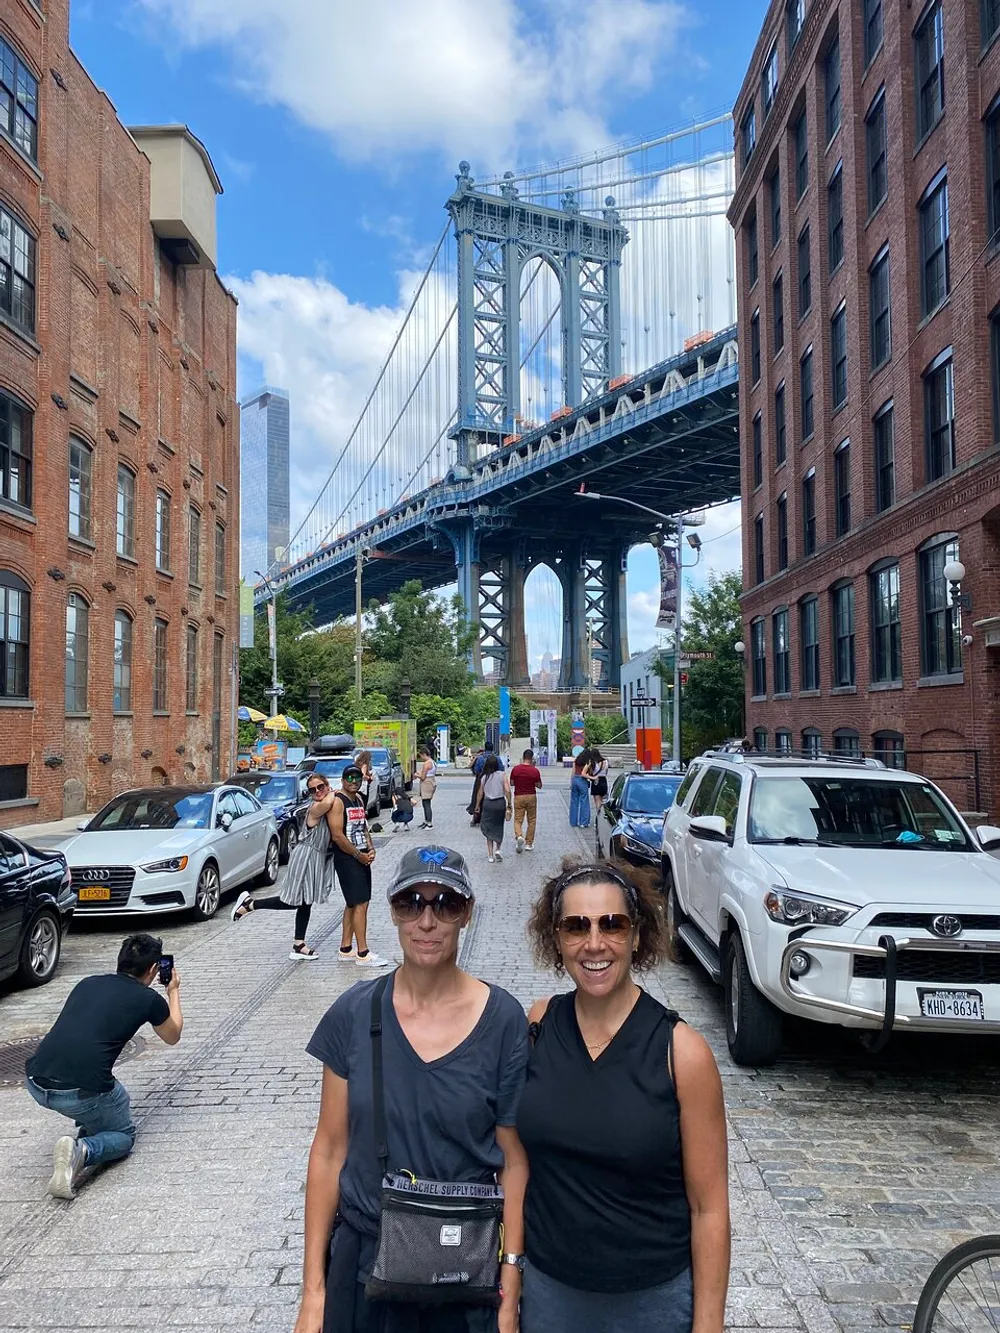 Two individuals pose for a photo on a cobblestone street with the Manhattan Bridge towering in the background amidst pedestrians and vehicles under a partly cloudy sky